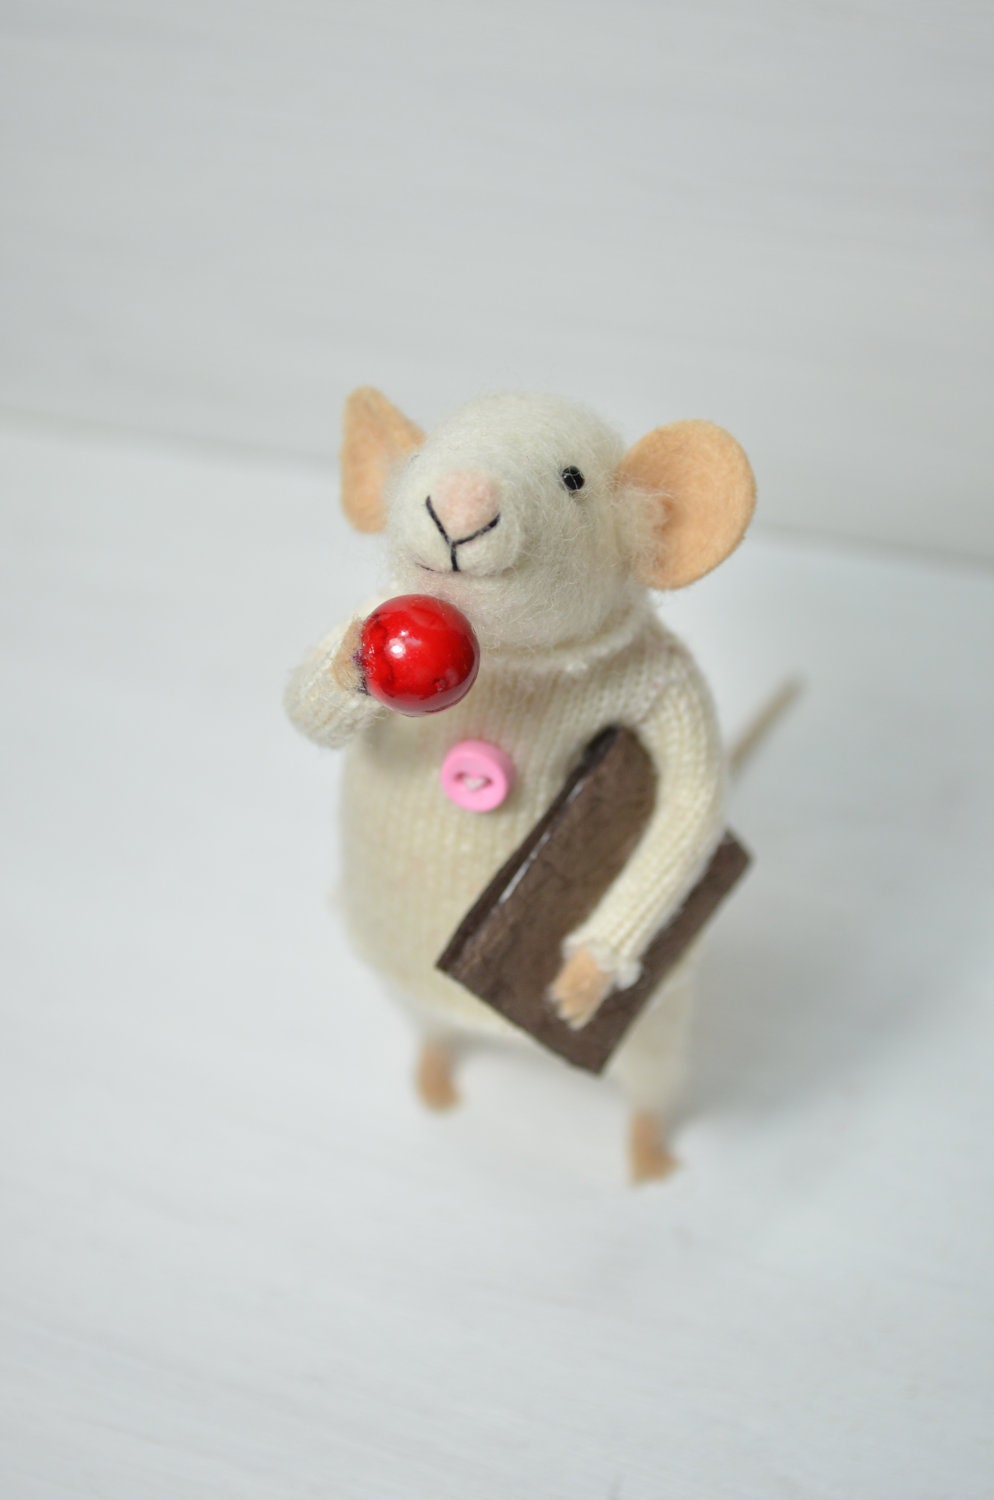 Little Reader Mouse - unique - needle felted ornament animal, felting dreams made to order